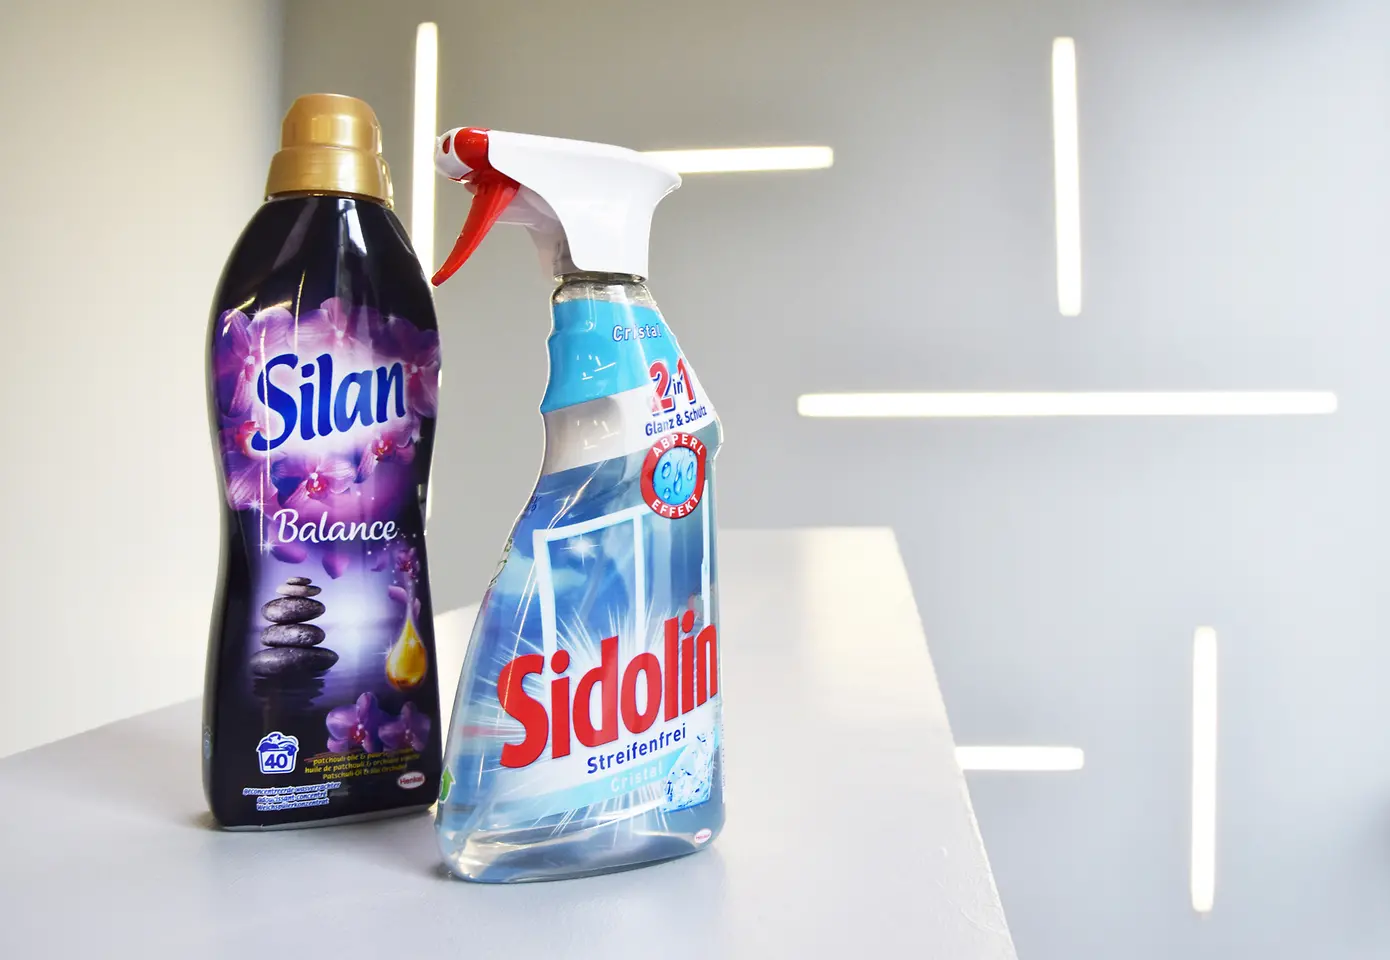 
In the pilot projects, Social Plastic was integrated into different bottle types for laundry and home care products available in selected countries in Western Europe.